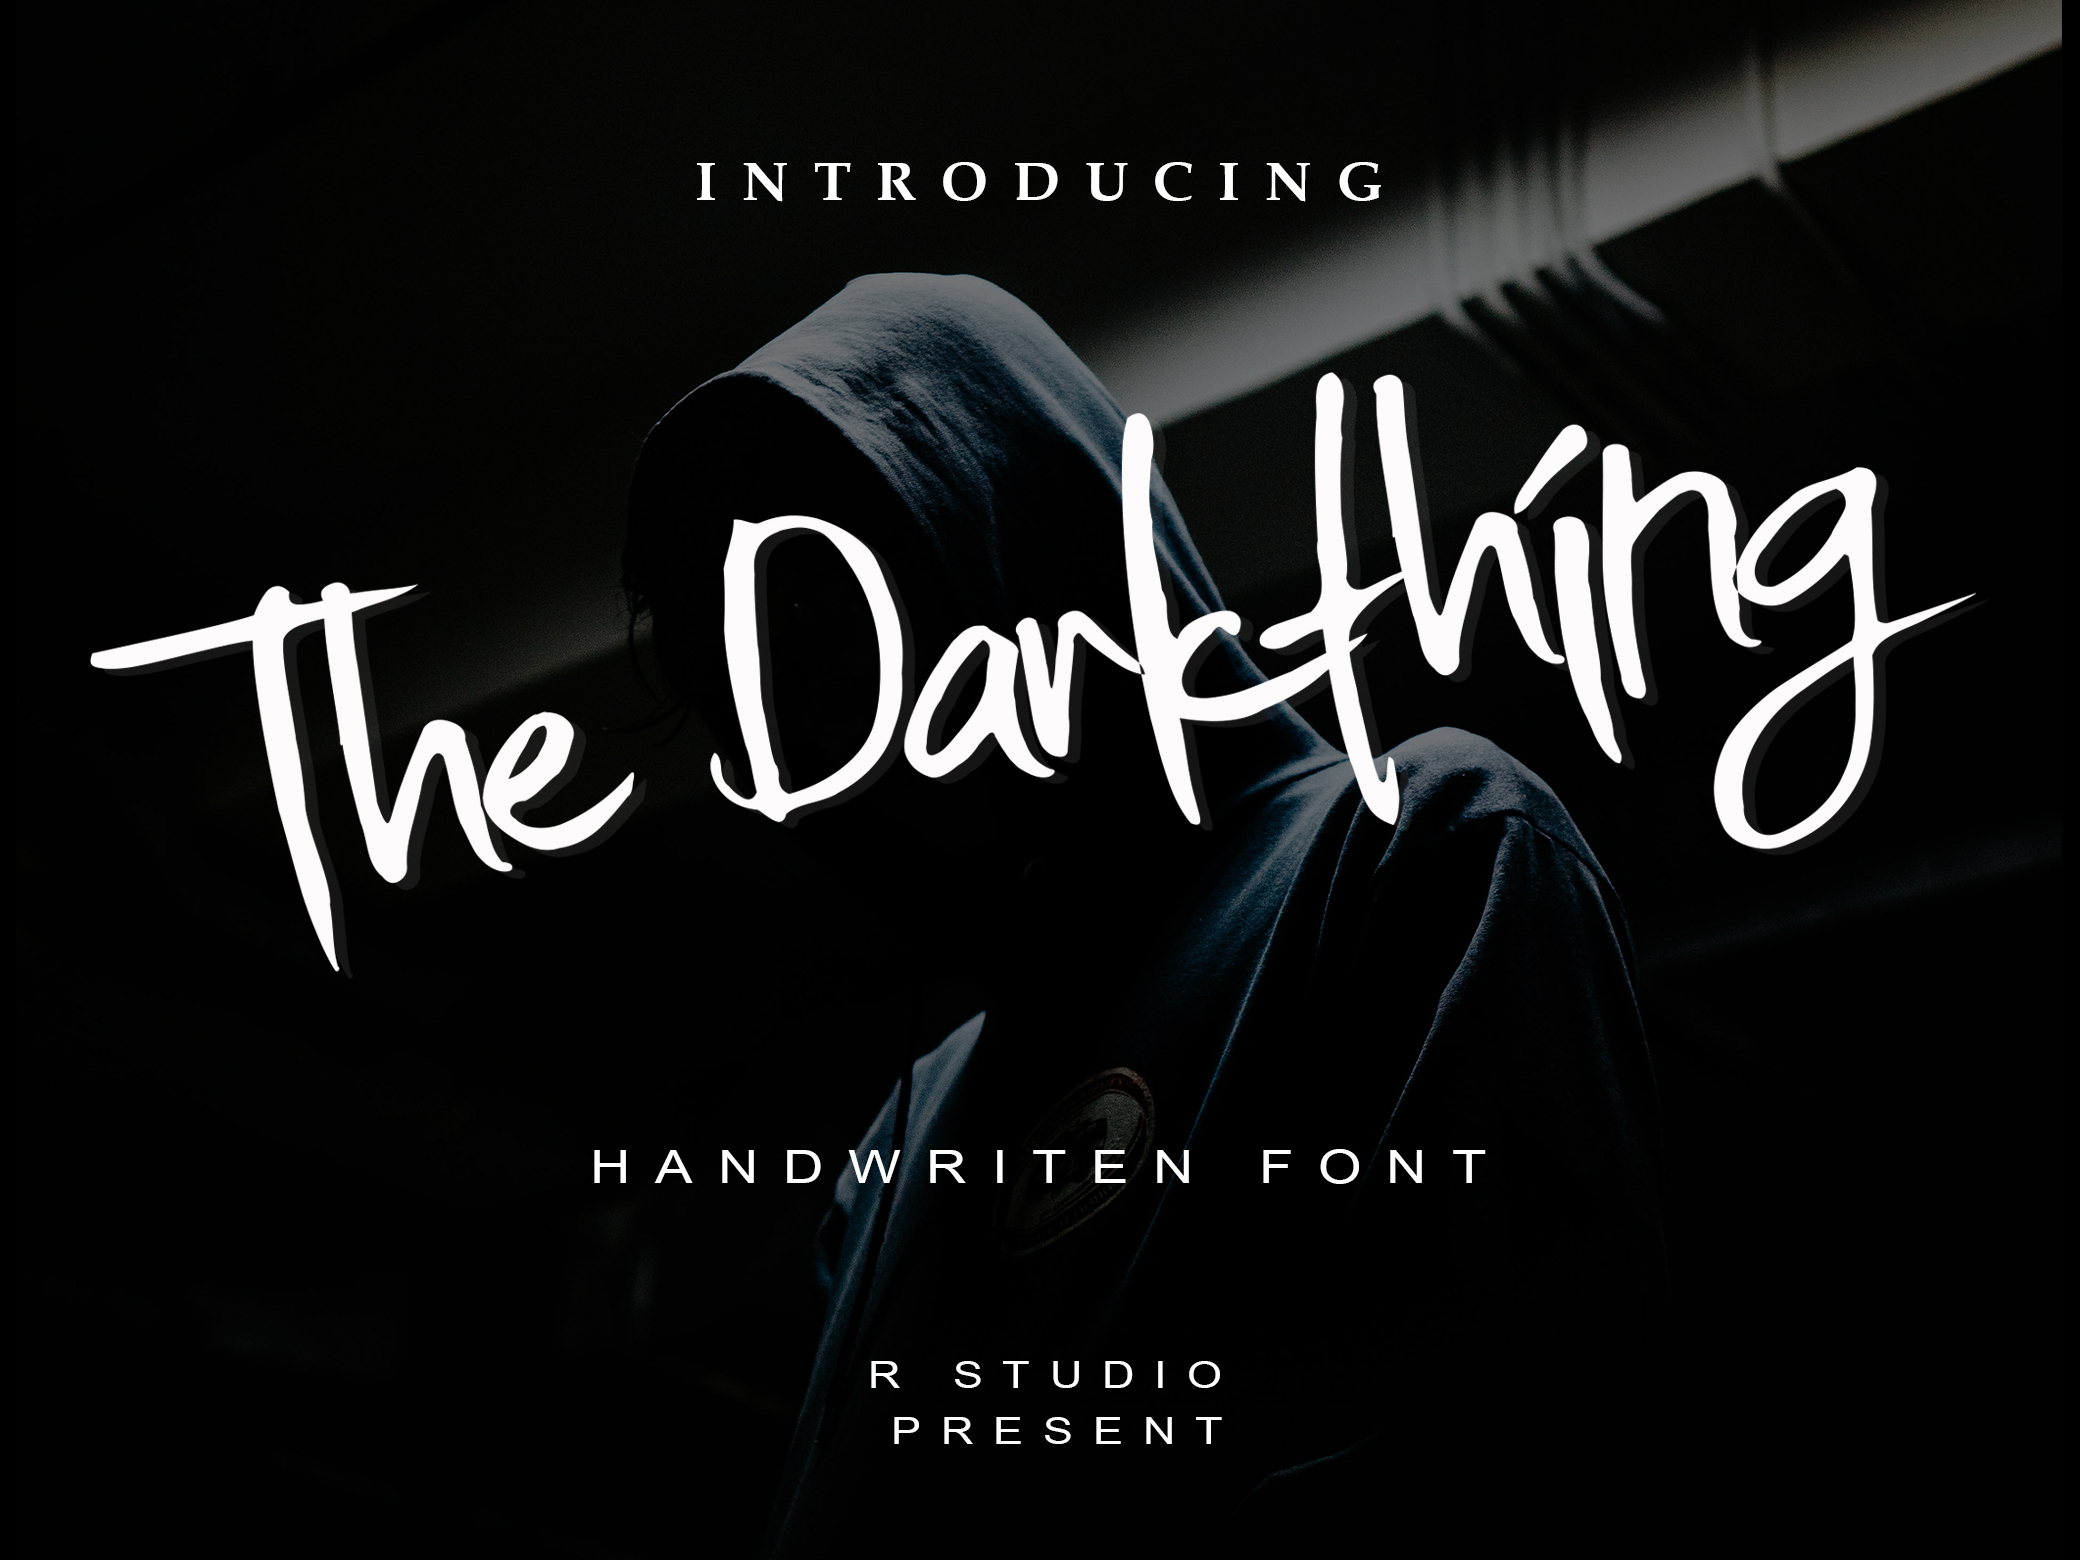 Download Free The Darkthing By R Studio On Dribbble PSD Mockup Template